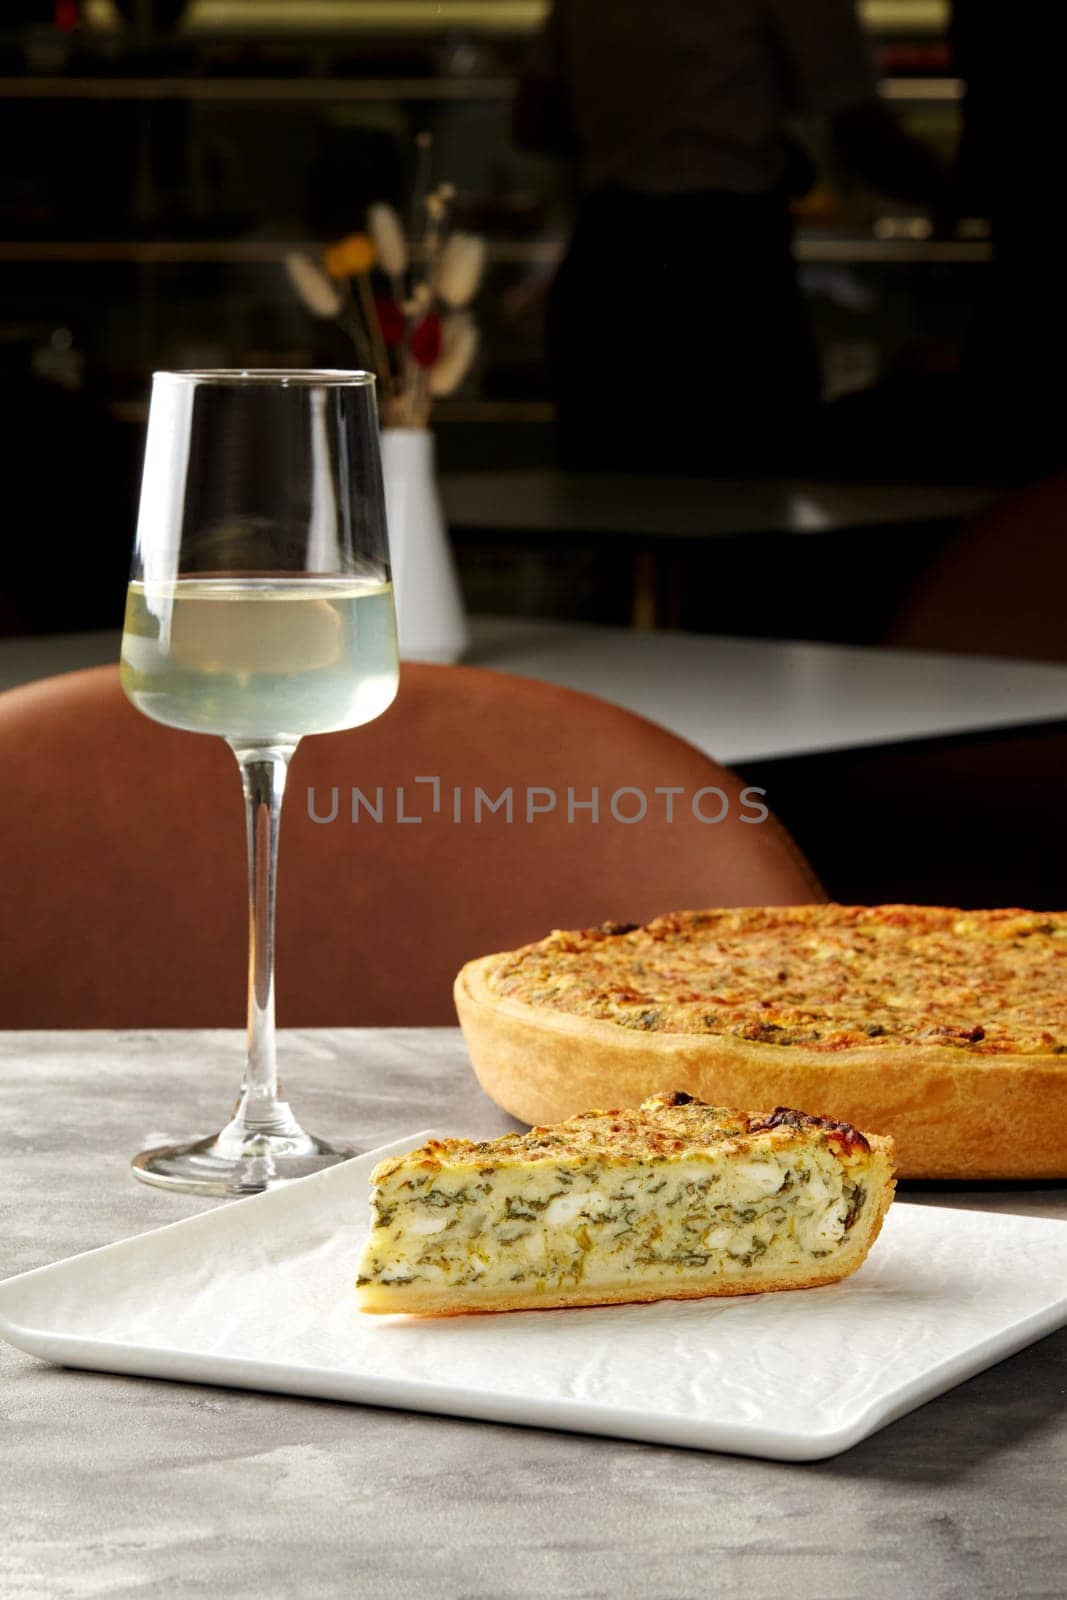 Slice of piquant cheese and spinach quiche with crispy shortbread crust served with glass of white wine in cozy cafe. Elegant dining setting